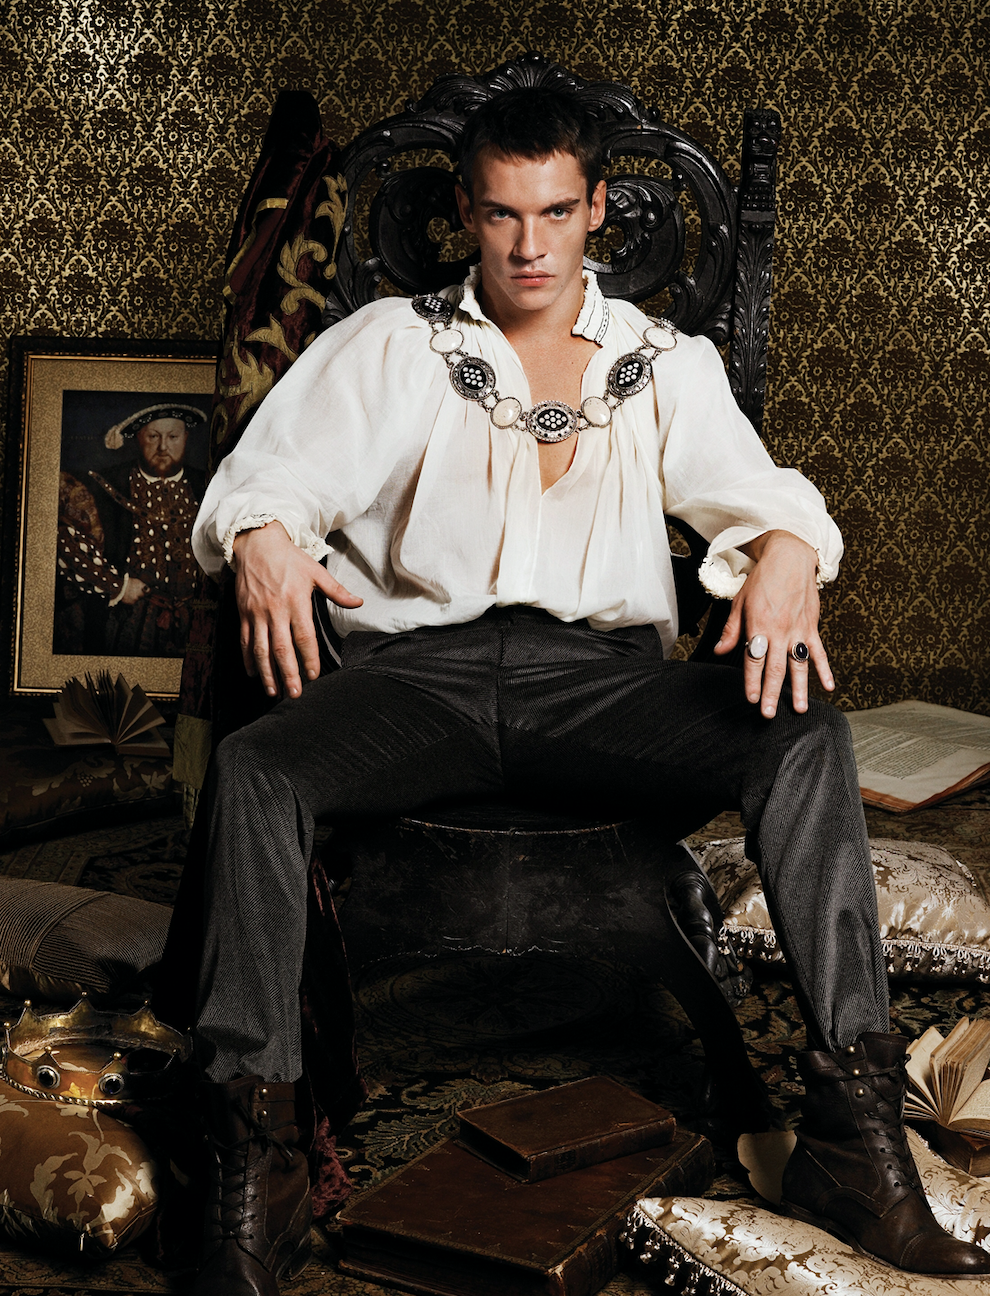 <p>Jonathan Rhys Meyers starred as King Henry VIII on the Showtime original series "The Tudors," which aired from 2007 to 2010. The show highlighted the wars and many women (including Natalie Dormer as Anne Boleyn) in the life of this notorious British monarch. Based on real-life events, the historical drama featured more scandal than a modern-day soap opera. (Just ask Henry Cavill, who played the king's duke bestie, Charles Brandon.)</p>